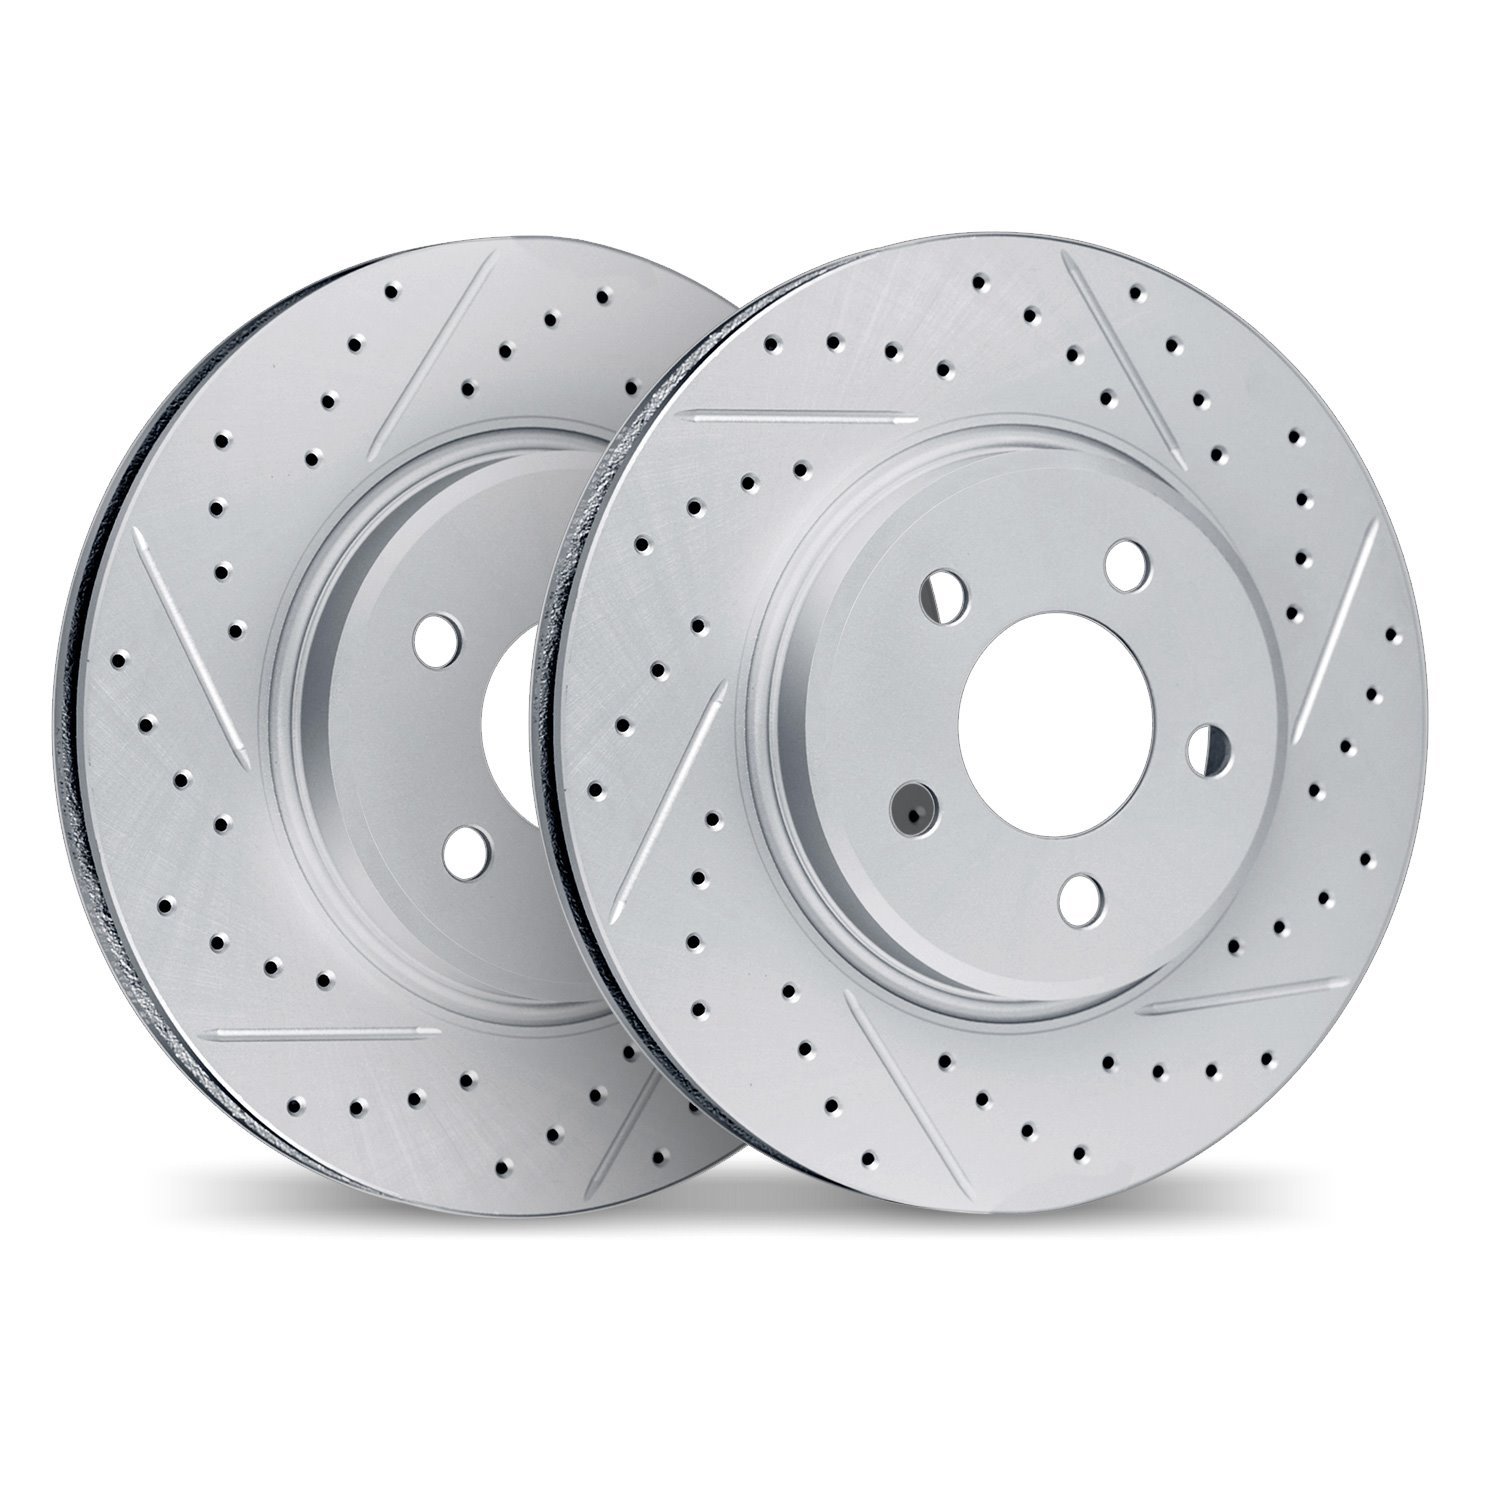 2002-46004 Geoperformance Drilled/Slotted Brake Rotors, 2016-2020 GM, Position: Front